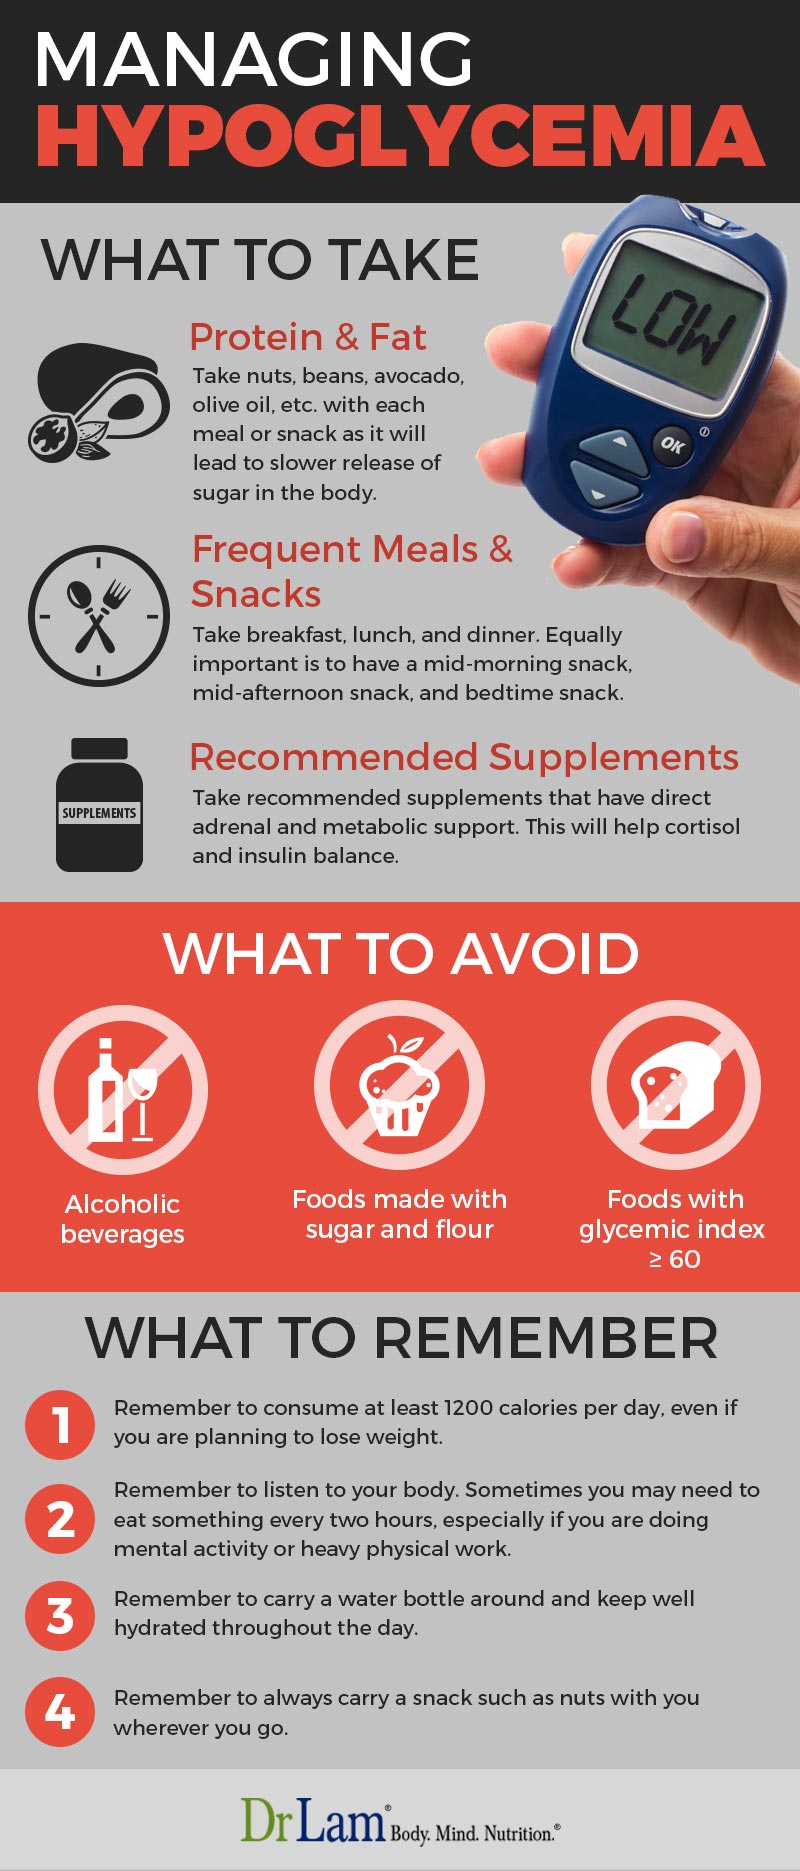 Check out this easy to understand infographic about how to manage a hypoglycemia meal plan